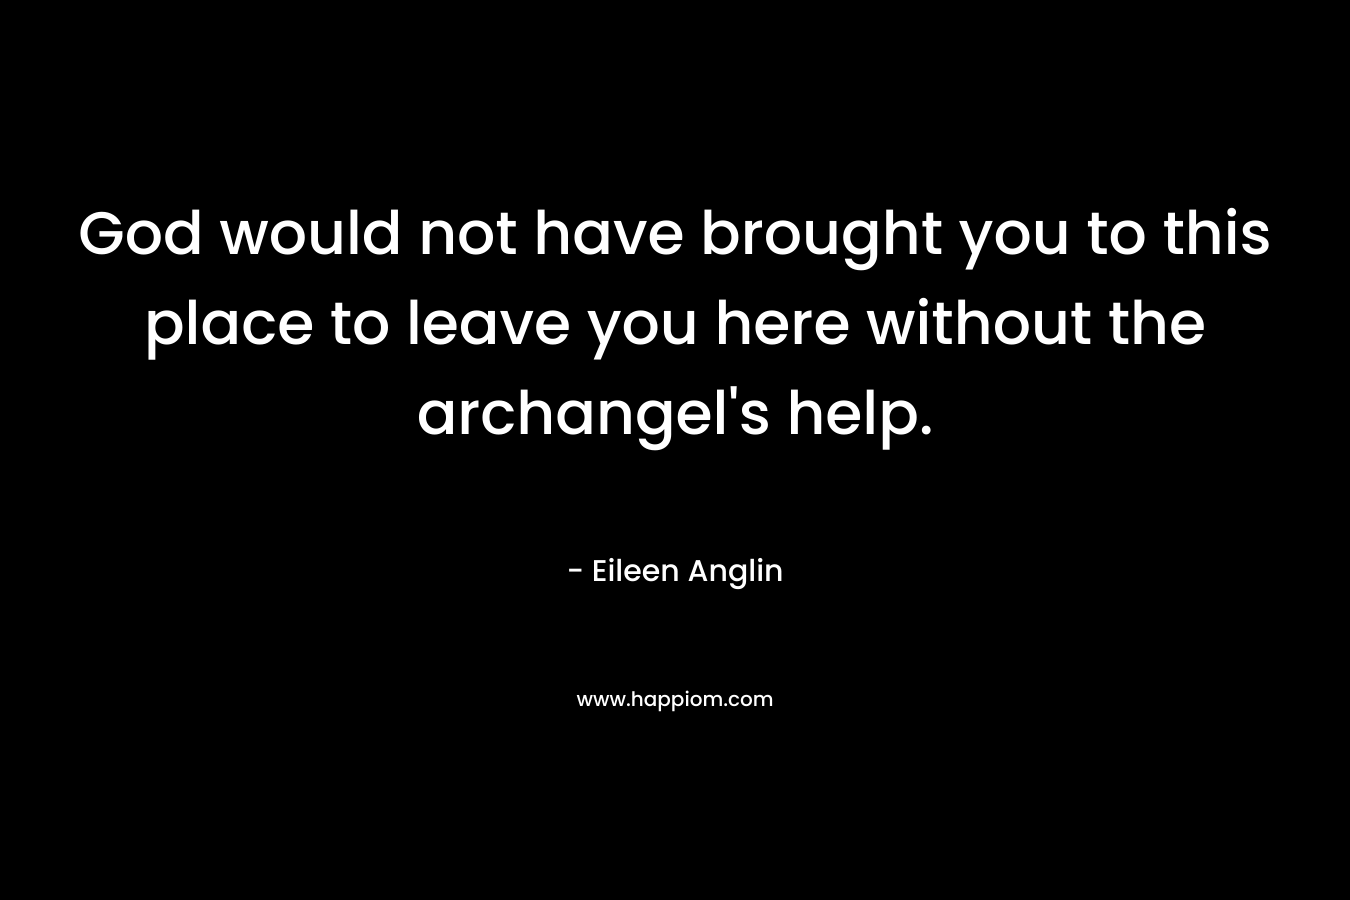 God would not have brought you to this place to leave you here without the archangel’s help. – Eileen Anglin